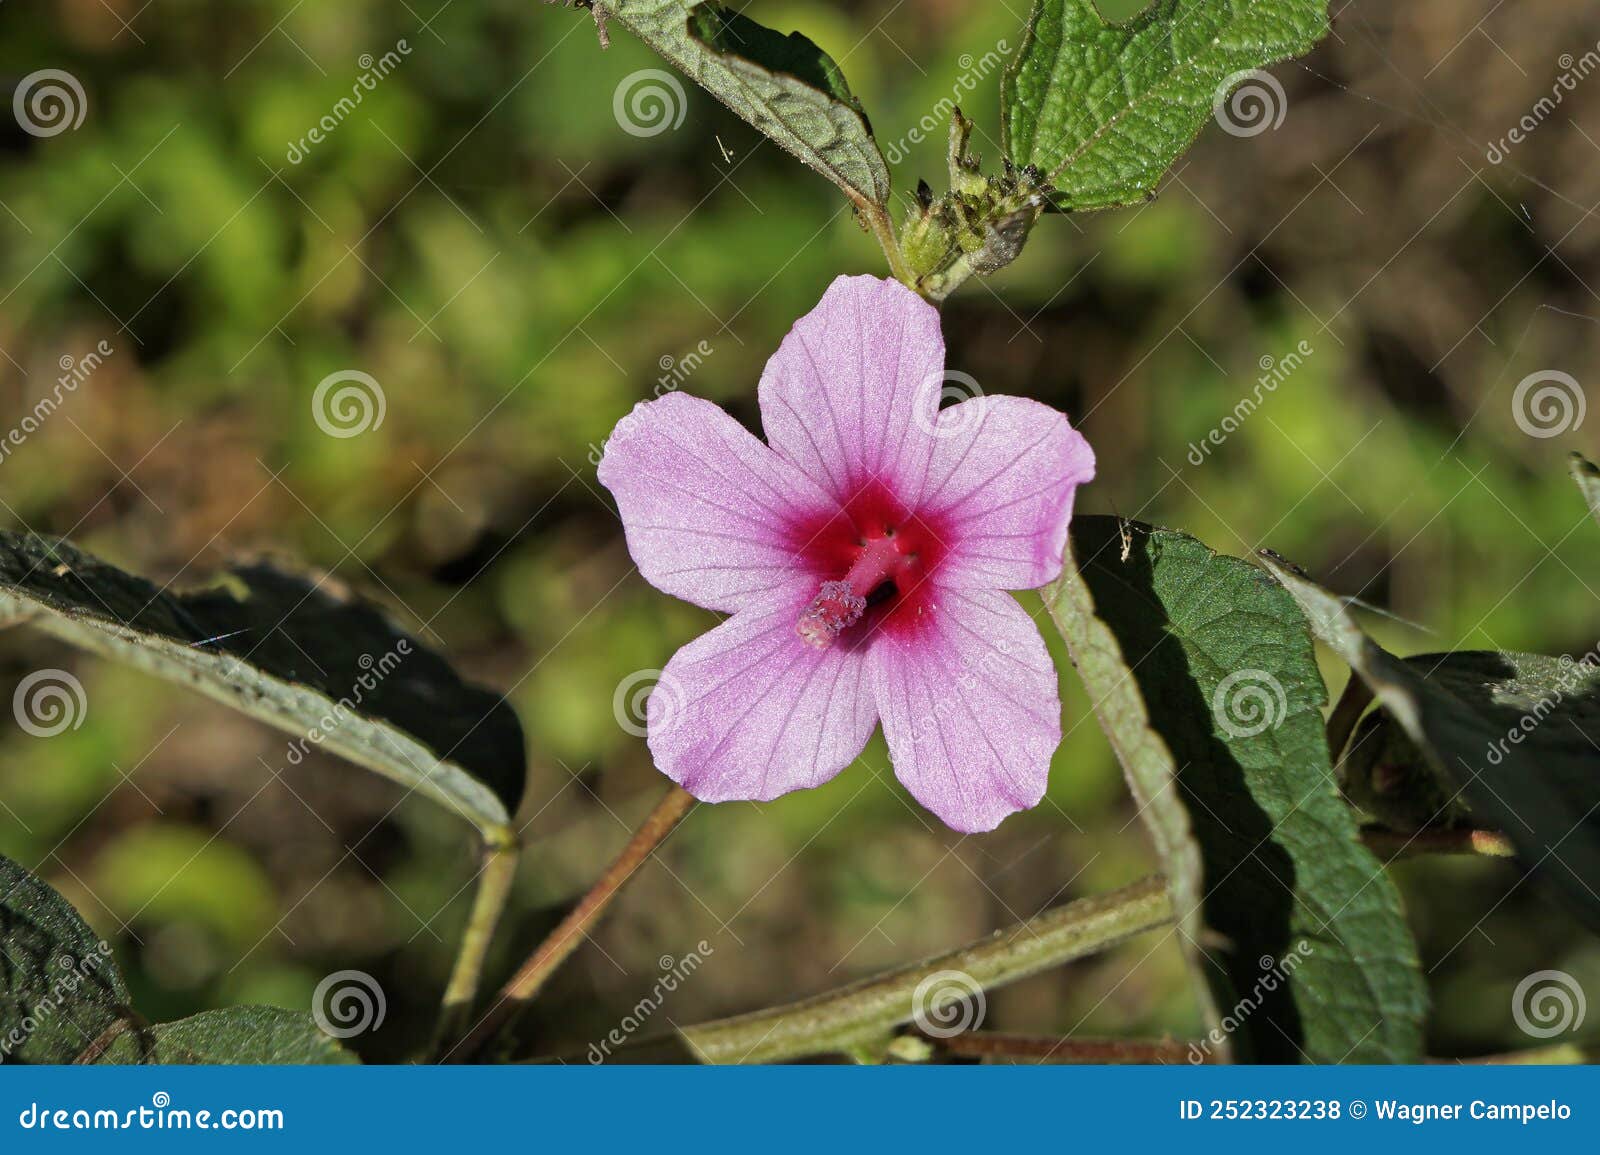 caesarweed or congo jute flower, urena lobata, on tropical forest